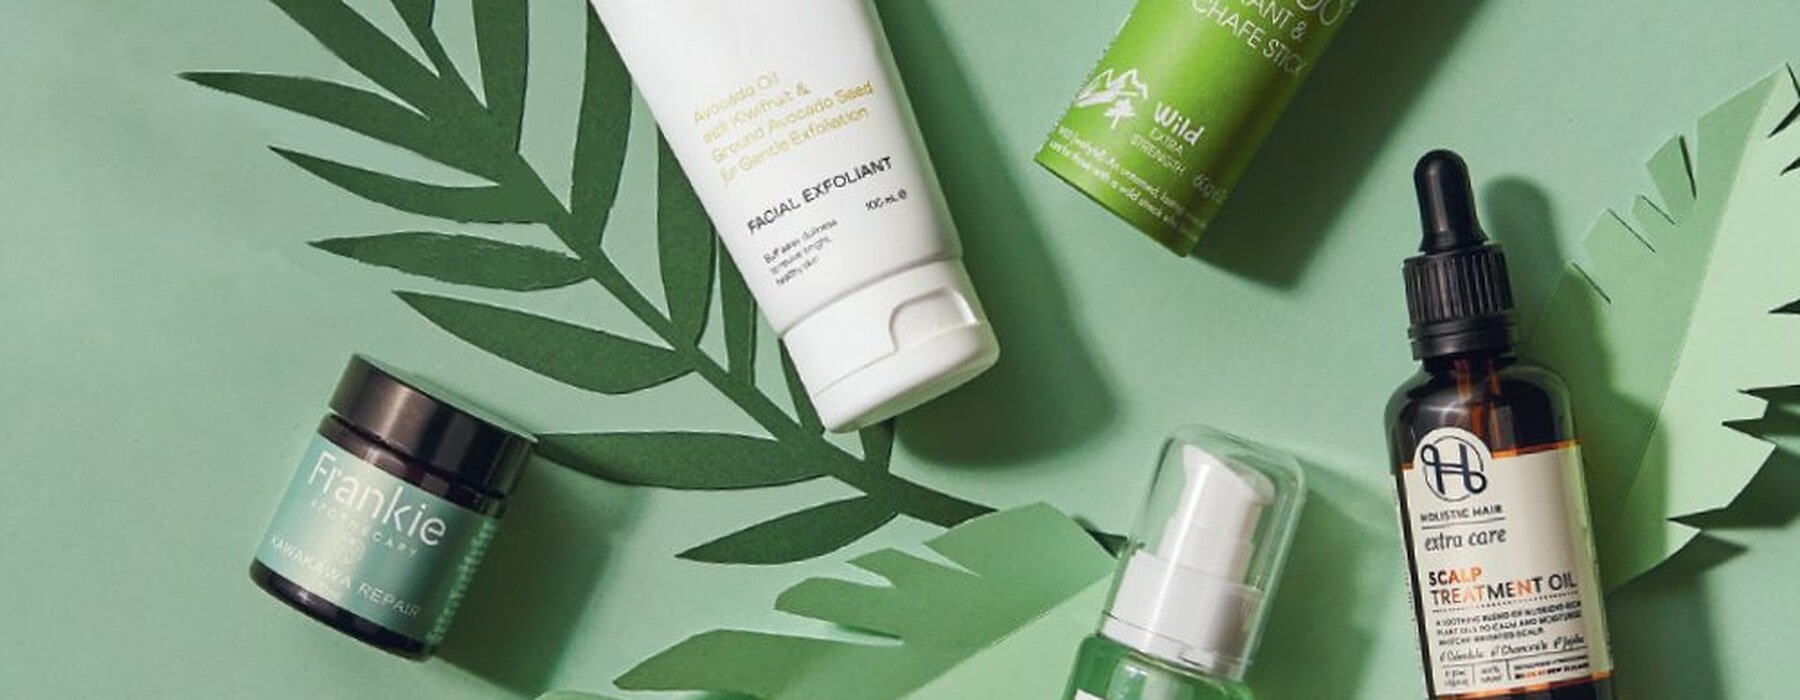 Collection of natural skincare and hair products on a green background with paper leaf cut outs